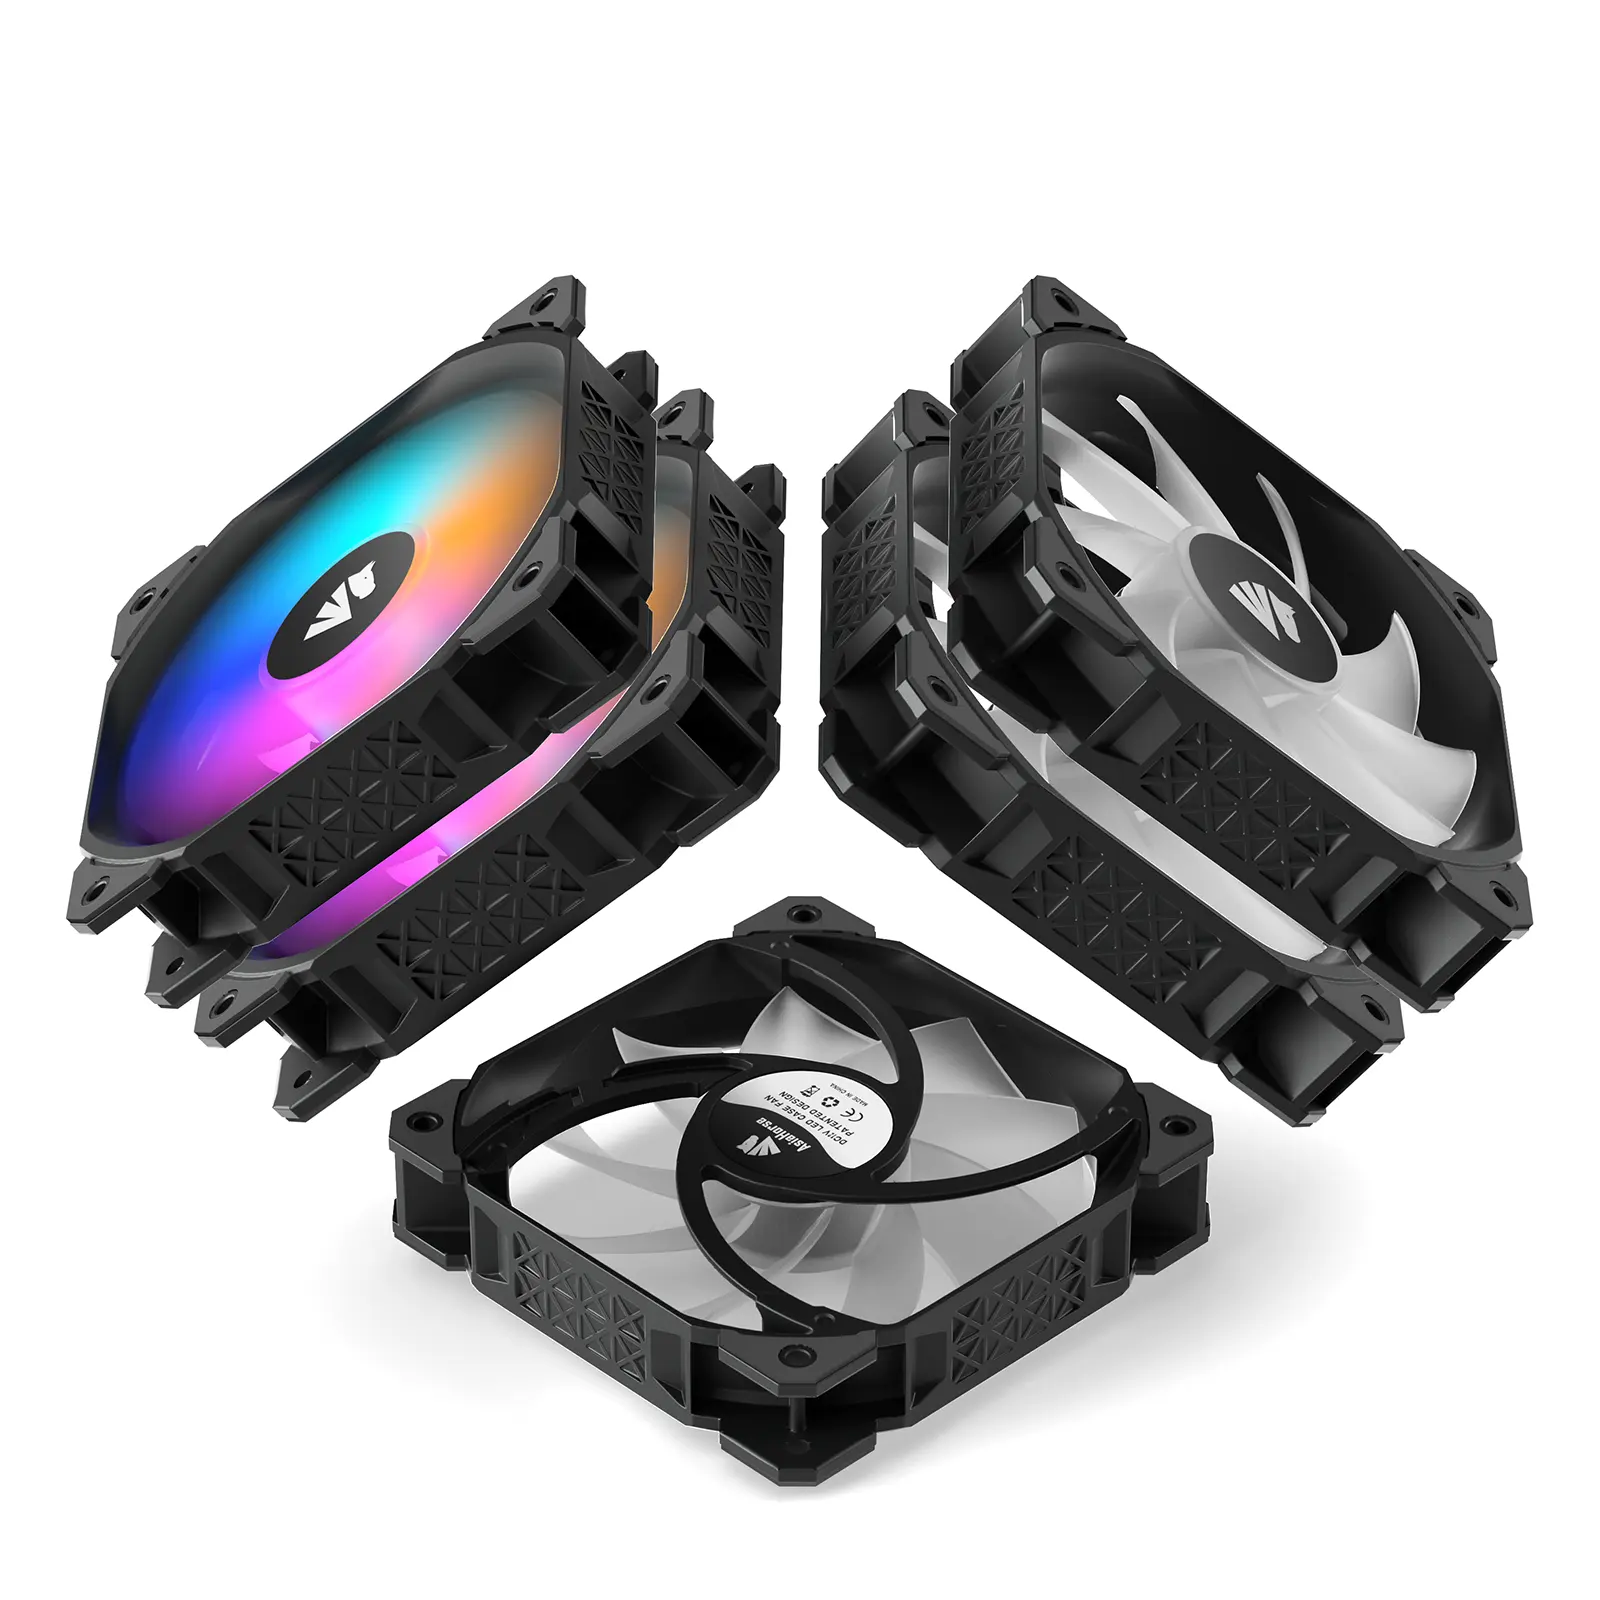 RGB Electrical Cooling Fans For PC Case With RGB LED Lights CPU Cooler Fan 120mm Ventilador RGB Cooler Fan